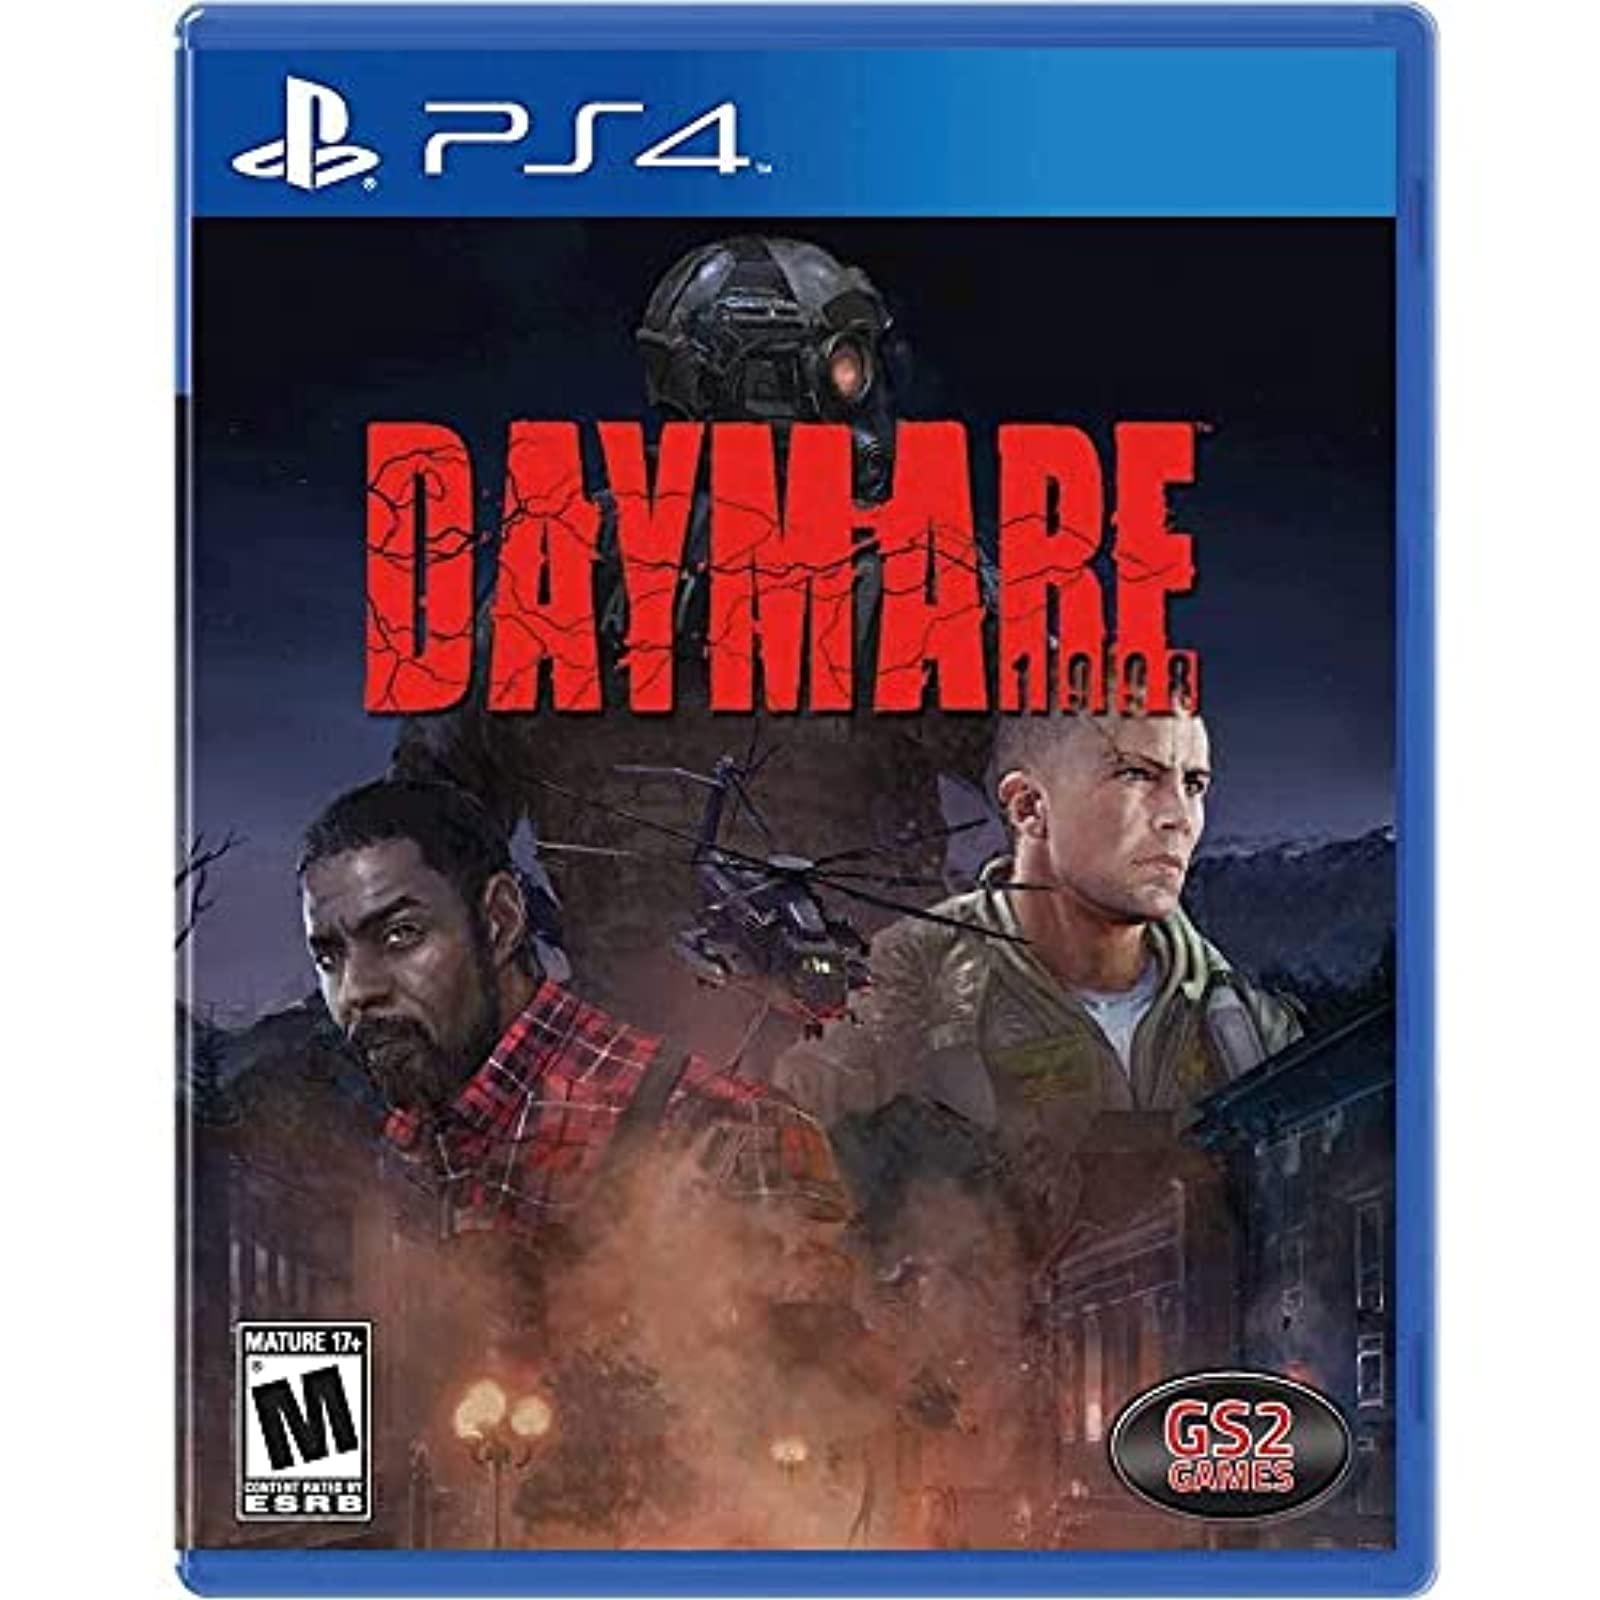 Daymare - 1998 (PS4) (GameReplay)